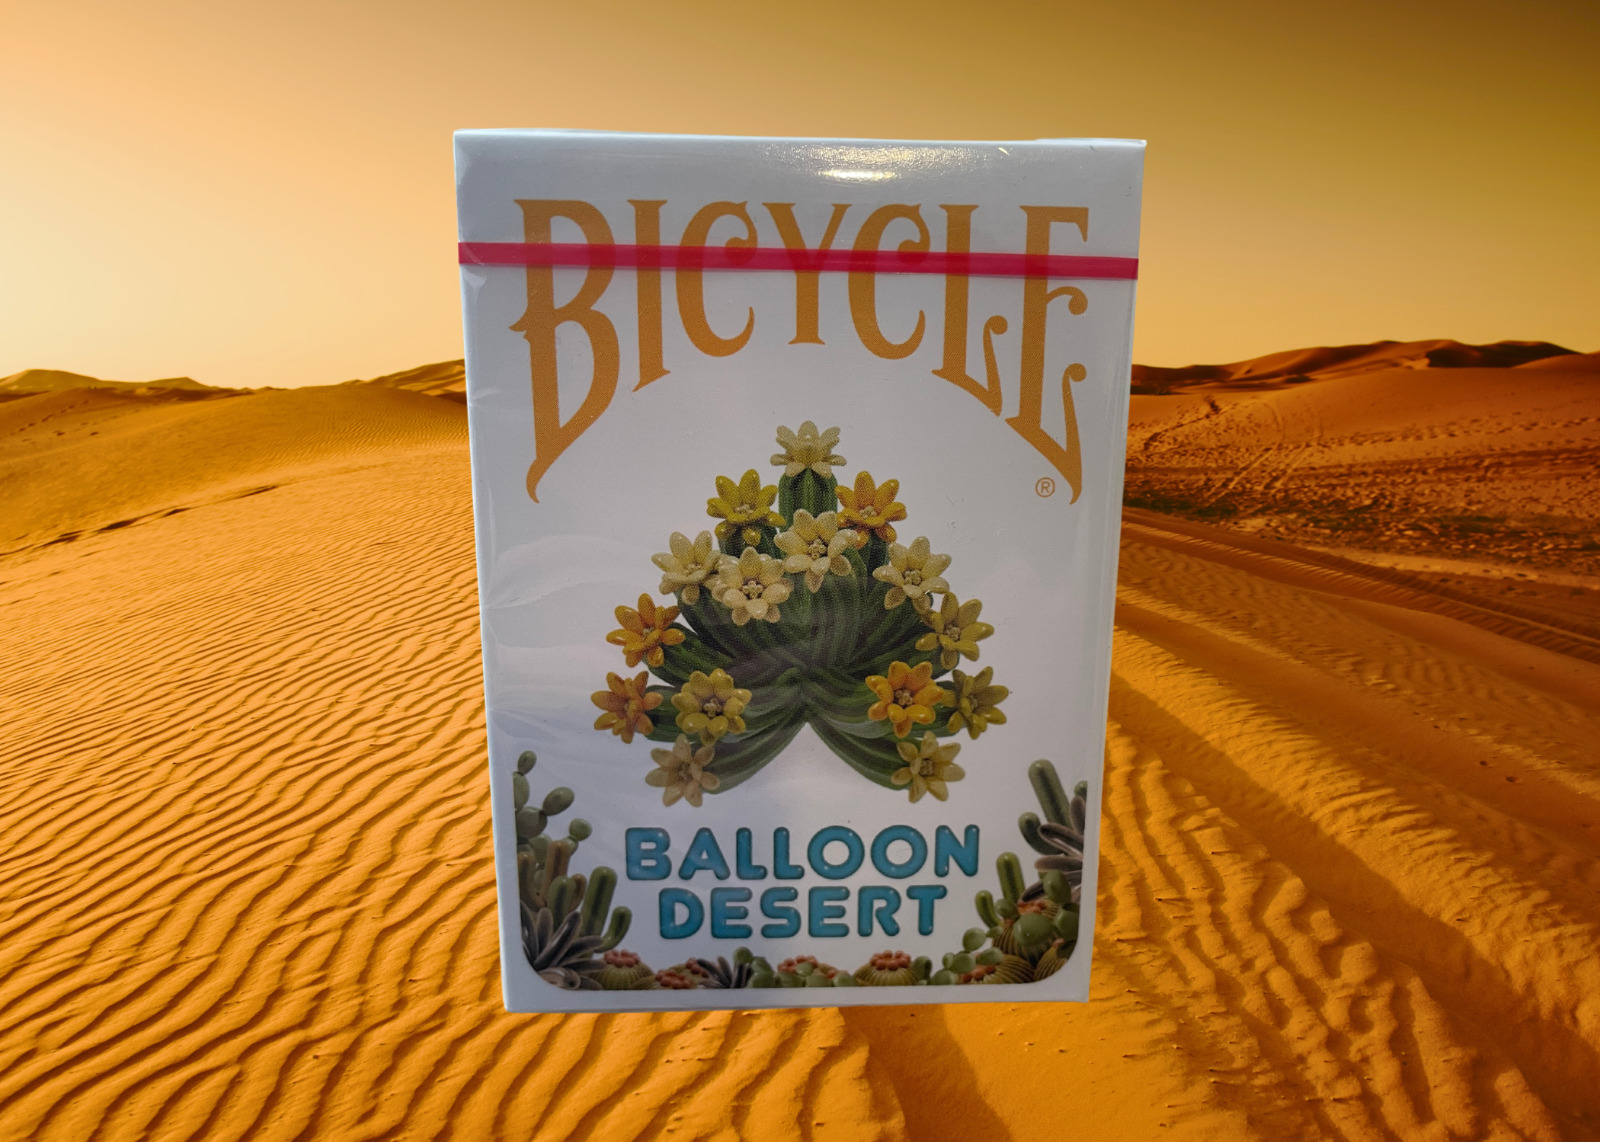 Balloon Desert Stripper - Limited Edition Bicycle Playing Cards